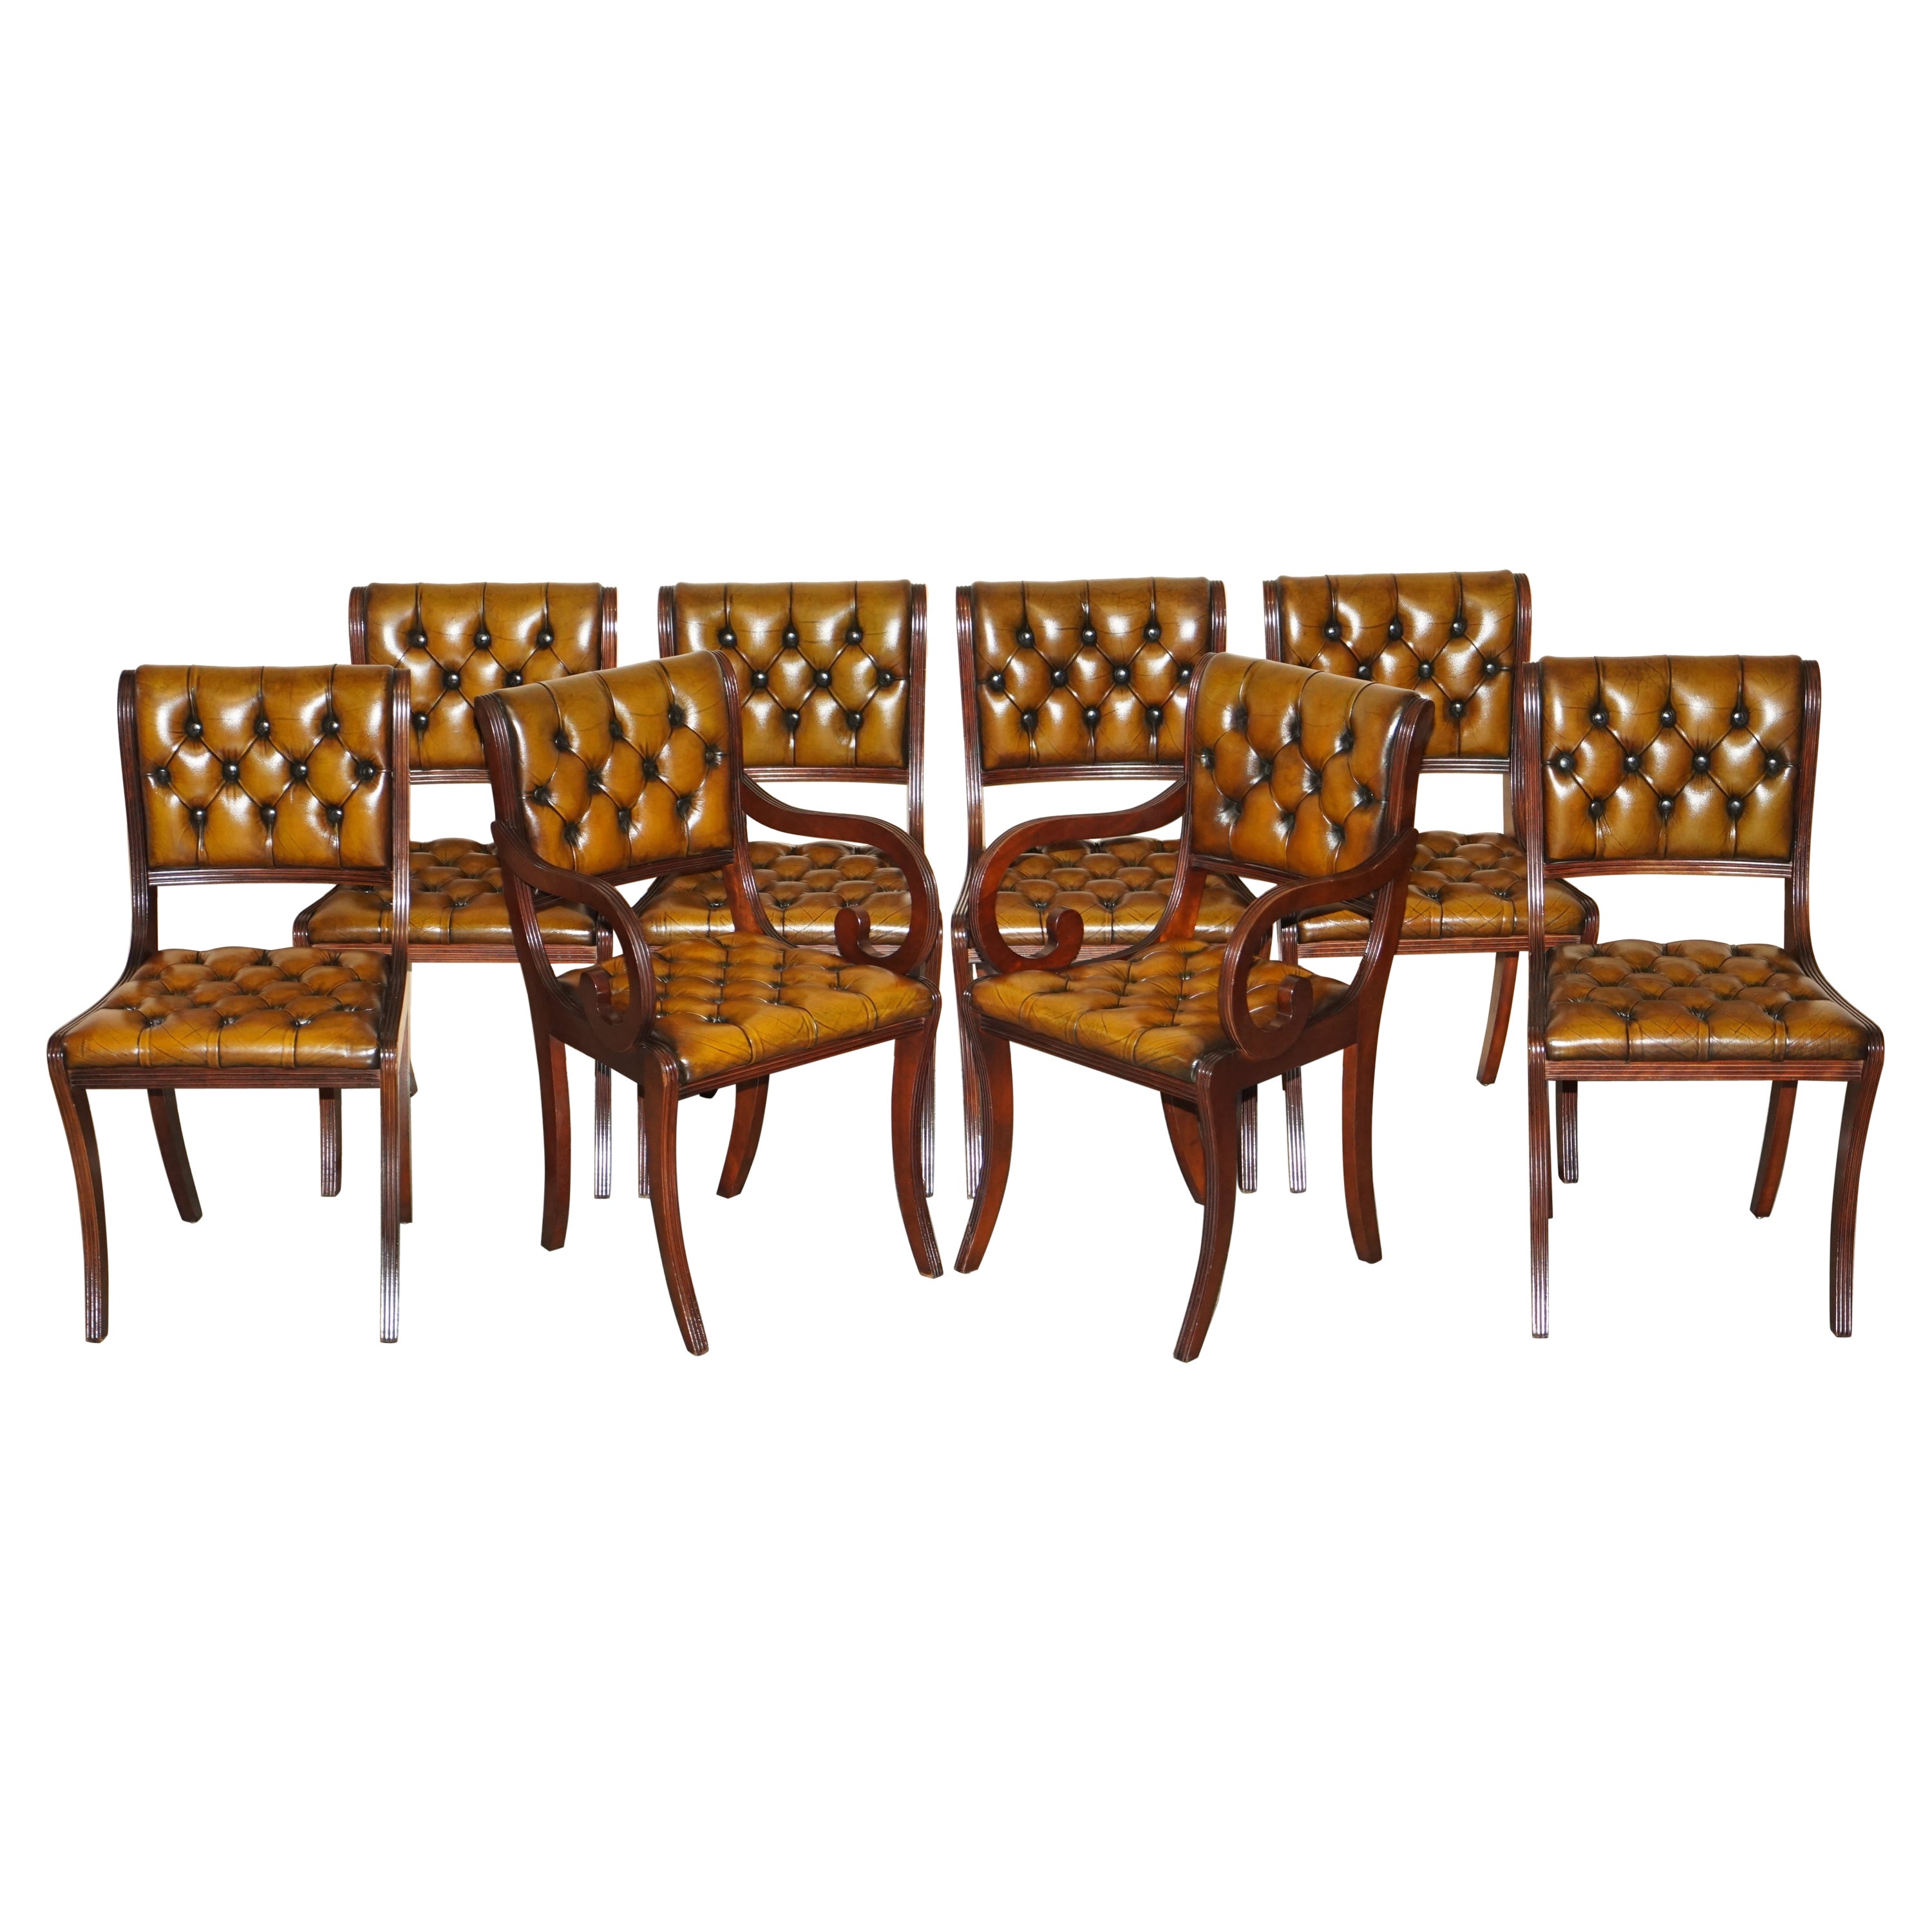 Eight Vintage Hardwood Fully Restored Chesterfield Brown Leather Dining Chairs 8